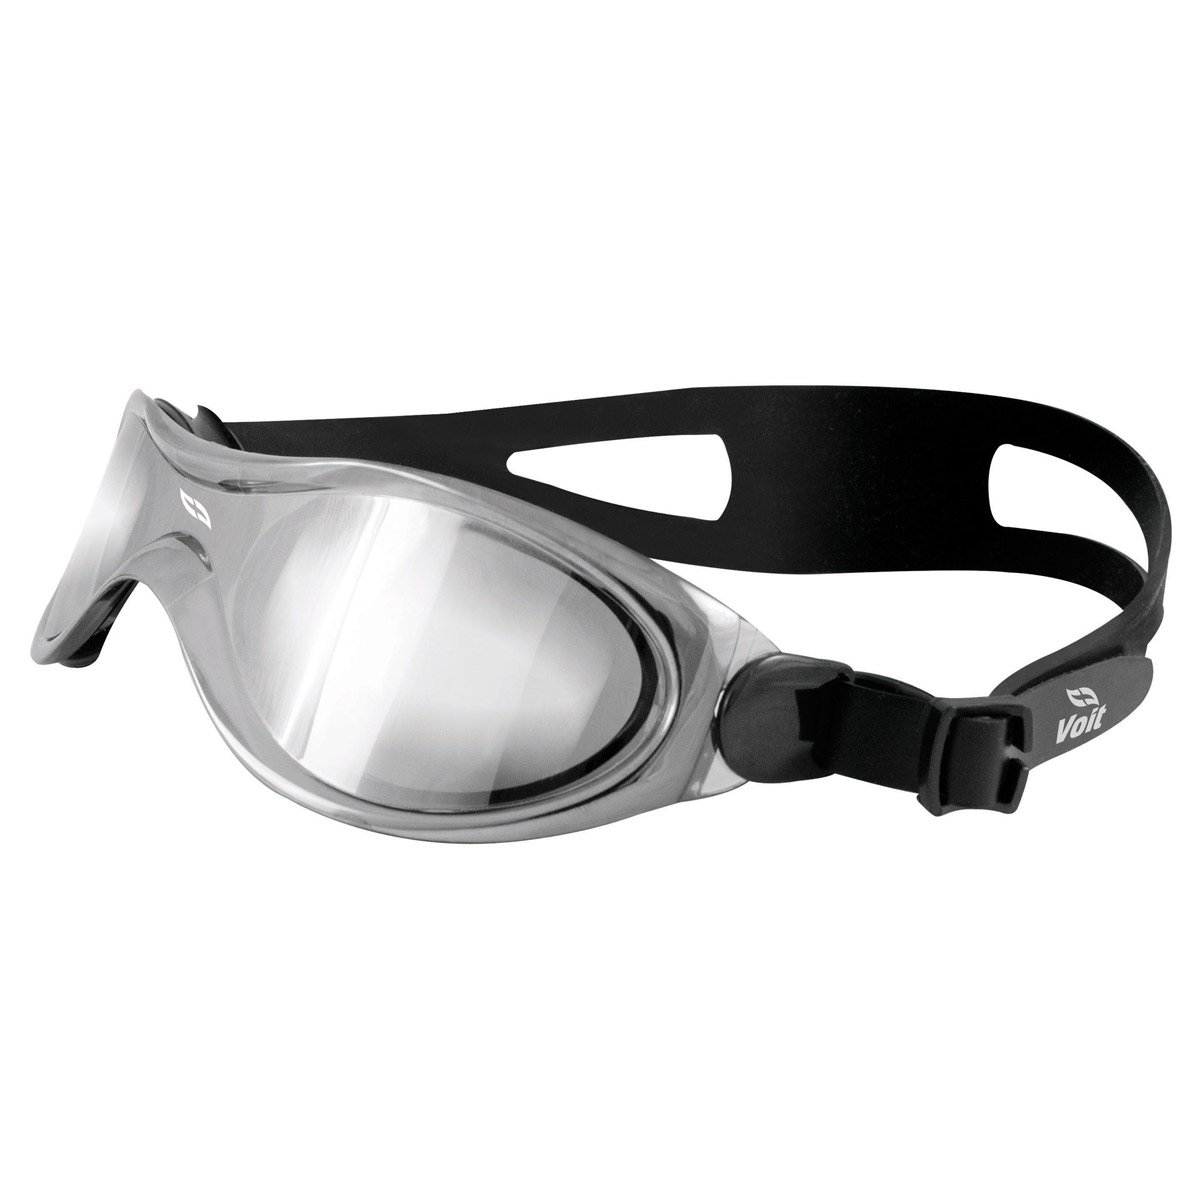 Goggle Voit Missile